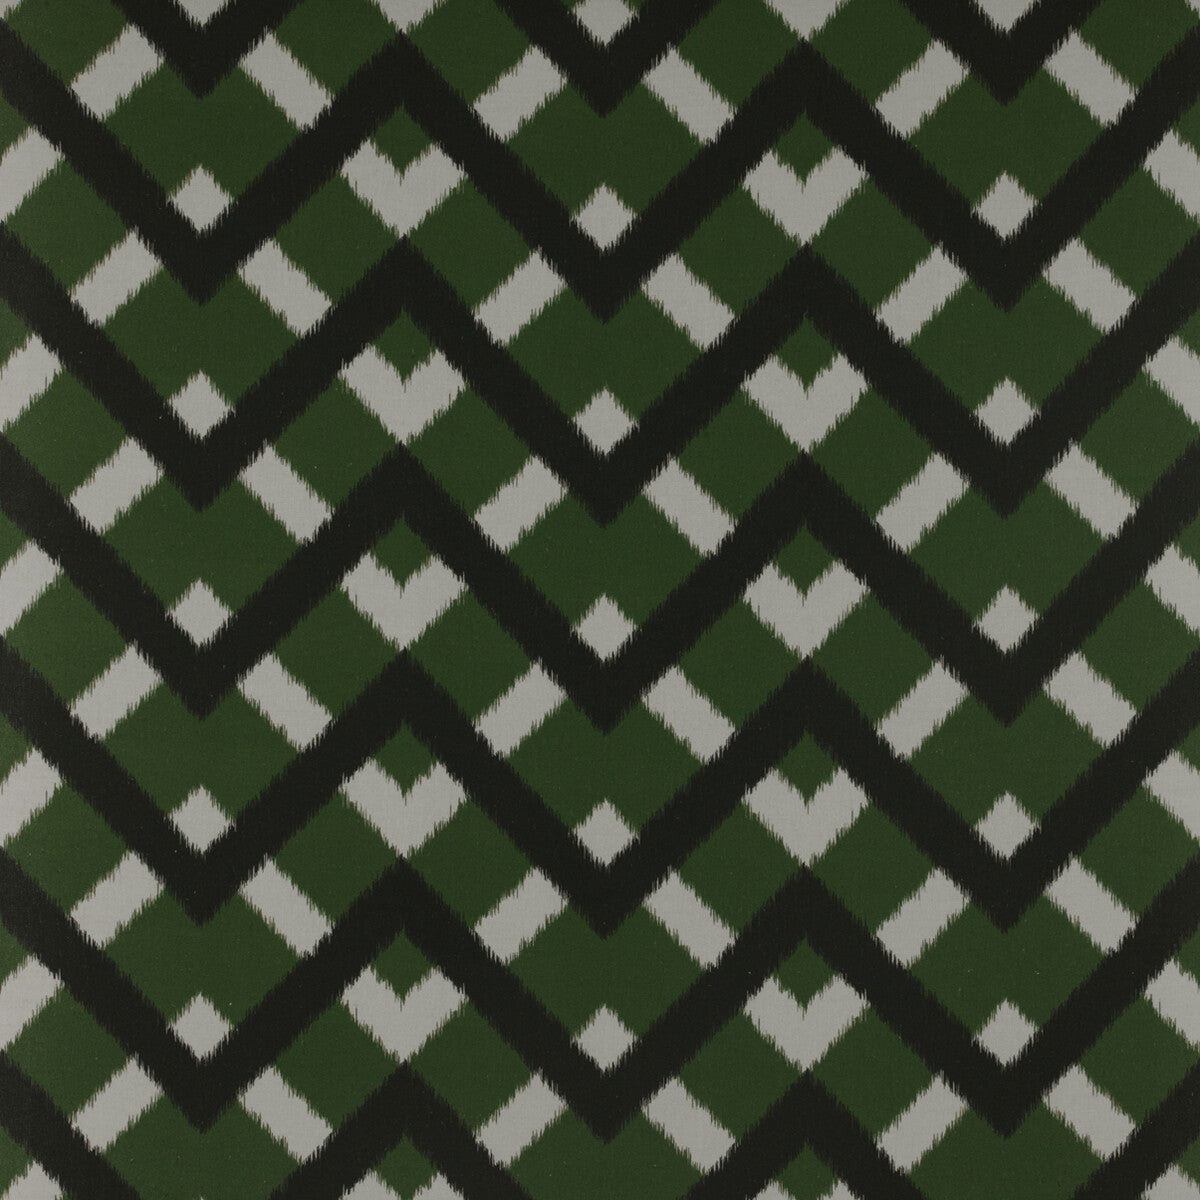 Monti fabric in verde color - pattern GDT5338.001.0 - by Gaston y Daniela in the Tierras collection